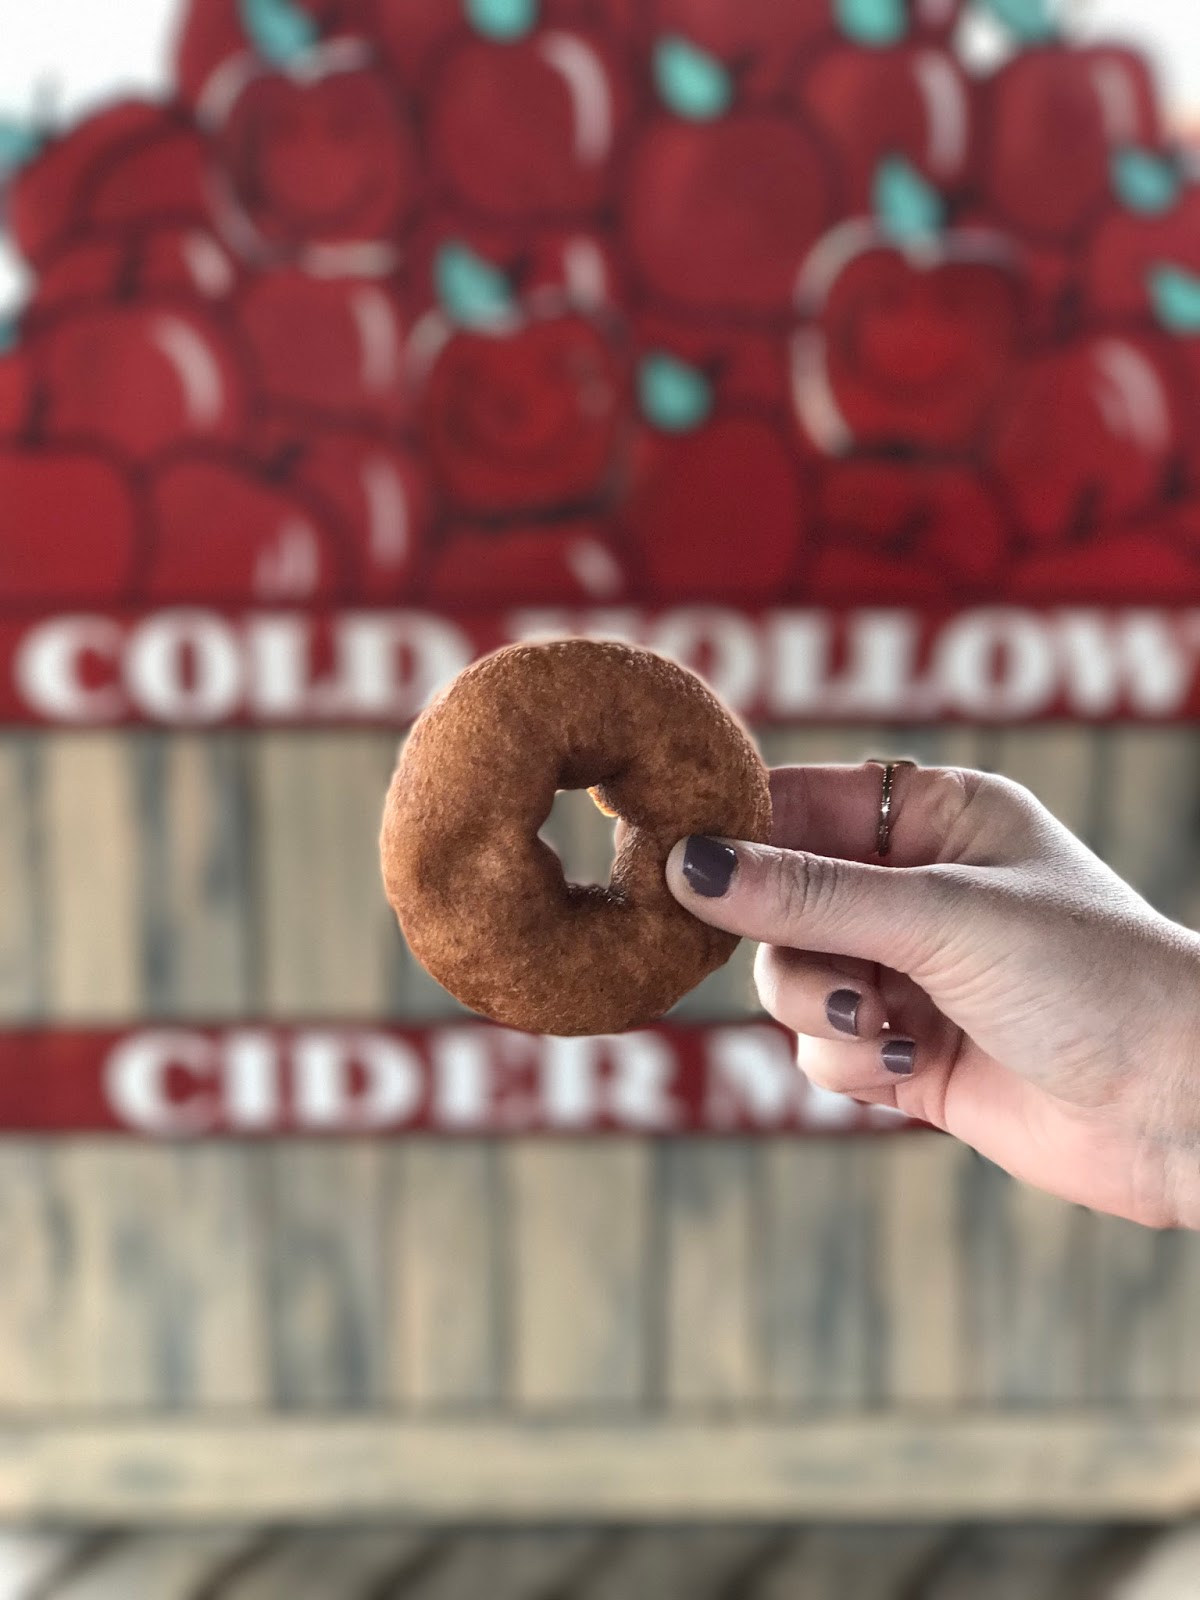 cider donut, cold hollow cider, tourist attraction stowe, vermont, what to do in stowe